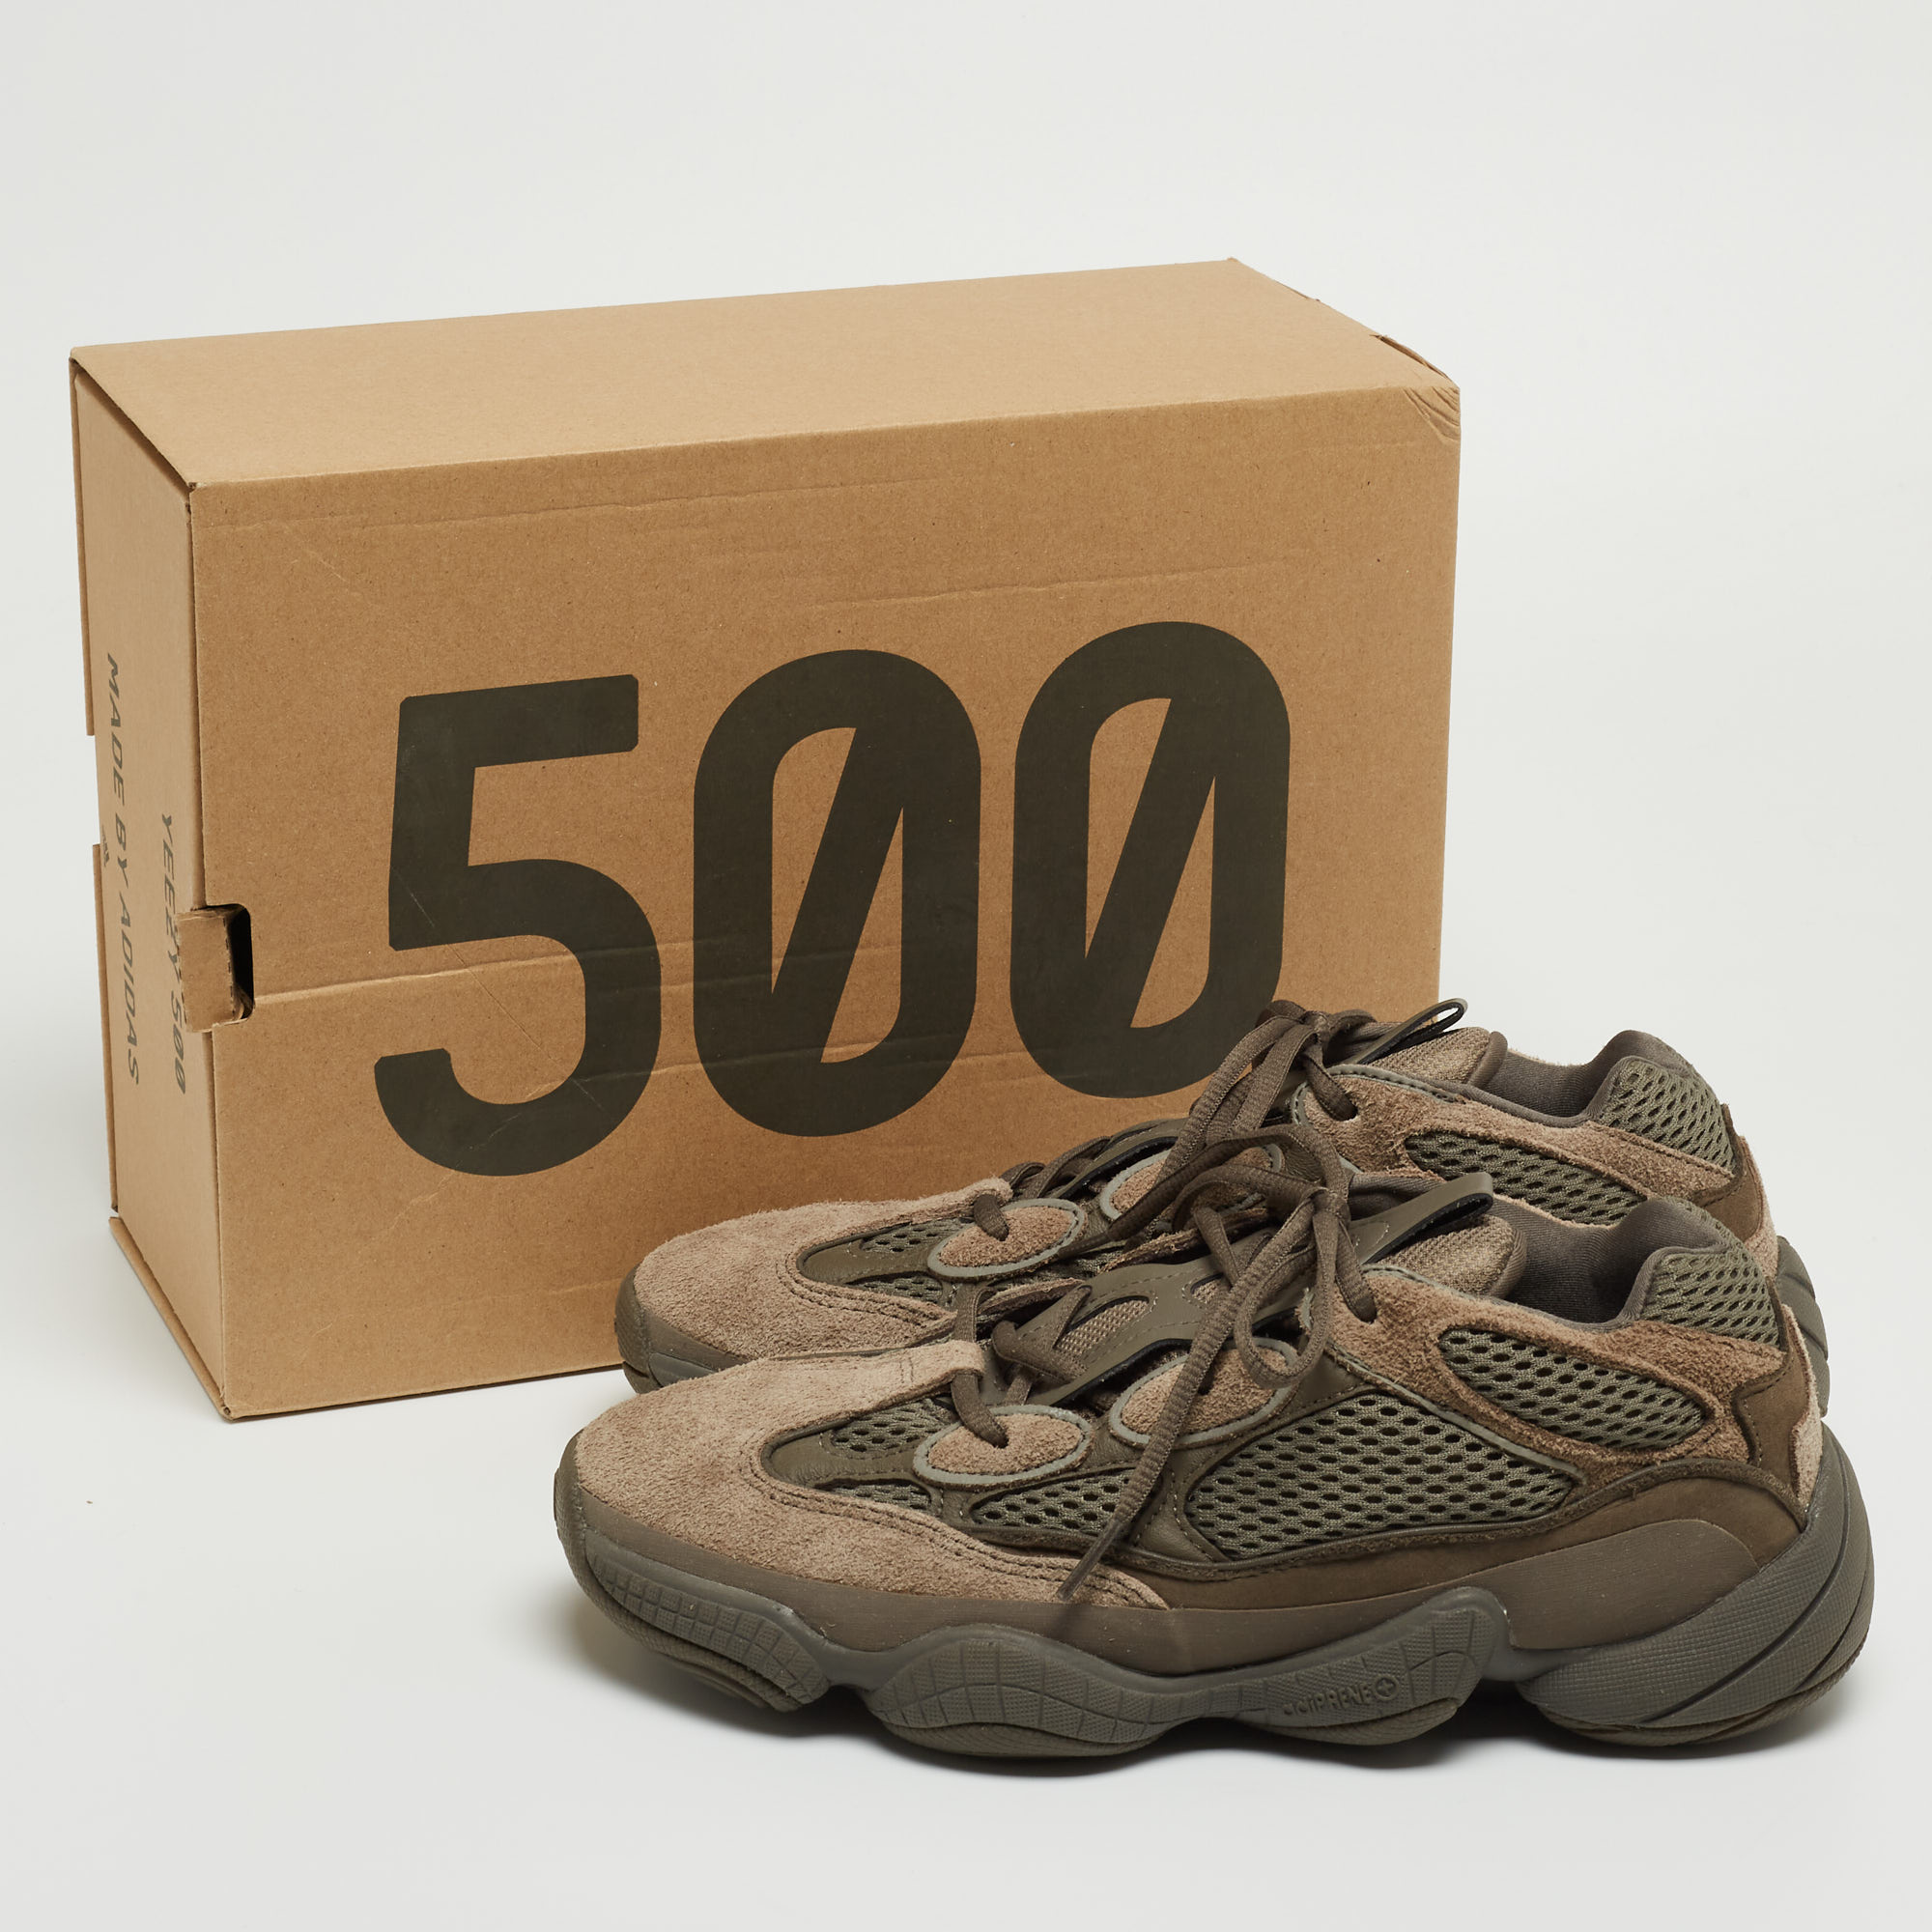 Yeezy X Adidas Two Tone Mesh And Suede Yeezy 500 Clay Brown Sneakers Size 41 1/3